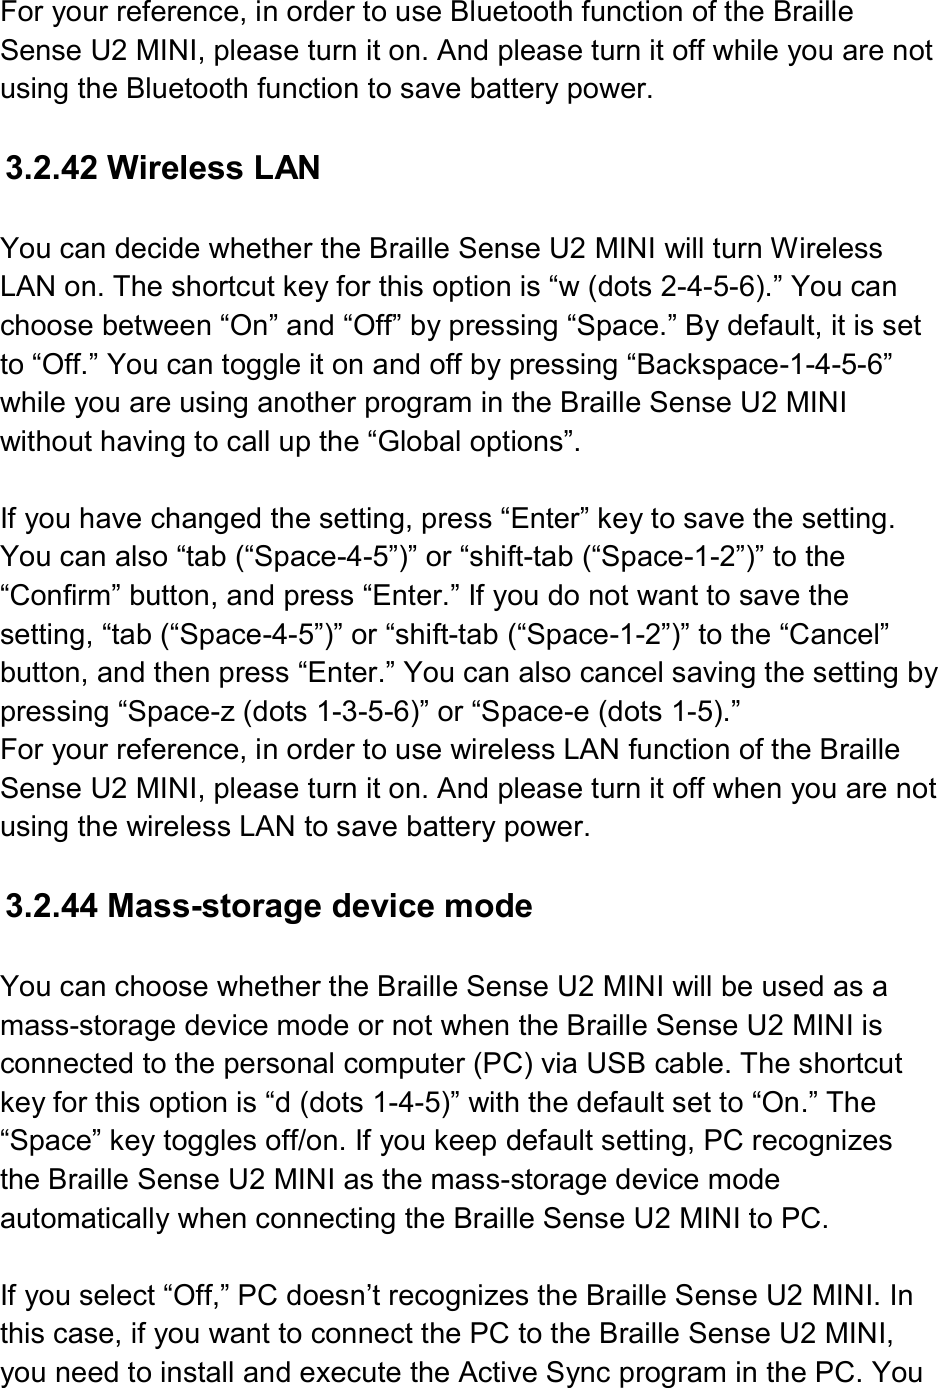  For your reference, in order to use Bluetooth function of the Braille Sense U2 MINI, please turn it on. And please turn it off while you are not using the Bluetooth function to save battery power.  3.2.42 Wireless LAN  You can decide whether the Braille Sense U2 MINI will turn Wireless LAN on. The shortcut key for this option is “w (dots 2-4-5-6).” You can choose between “On” and “Off” by pressing “Space.” By default, it is set to “Off.” You can toggle it on and off by pressing “Backspace-1-4-5-6” while you are using another program in the Braille Sense U2 MINI without having to call up the “Global options”.  If you have changed the setting, press “Enter” key to save the setting. You can also “tab (“Space-4-5”)” or “shift-tab (“Space-1-2”)” to the “Confirm” button, and press “Enter.” If you do not want to save the setting, “tab (“Space-4-5”)” or “shift-tab (“Space-1-2”)” to the “Cancel” button, and then press “Enter.” You can also cancel saving the setting by pressing “Space-z (dots 1-3-5-6)” or “Space-e (dots 1-5).”   For your reference, in order to use wireless LAN function of the Braille Sense U2 MINI, please turn it on. And please turn it off when you are not using the wireless LAN to save battery power.  3.2.44 Mass-storage device mode  You can choose whether the Braille Sense U2 MINI will be used as a mass-storage device mode or not when the Braille Sense U2 MINI is connected to the personal computer (PC) via USB cable. The shortcut key for this option is “d (dots 1-4-5)” with the default set to “On.” The “Space” key toggles off/on. If you keep default setting, PC recognizes the Braille Sense U2 MINI as the mass-storage device mode automatically when connecting the Braille Sense U2 MINI to PC.  If you select “Off,” PC doesn’t recognizes the Braille Sense U2 MINI. In this case, if you want to connect the PC to the Braille Sense U2 MINI, you need to install and execute the Active Sync program in the PC. You 